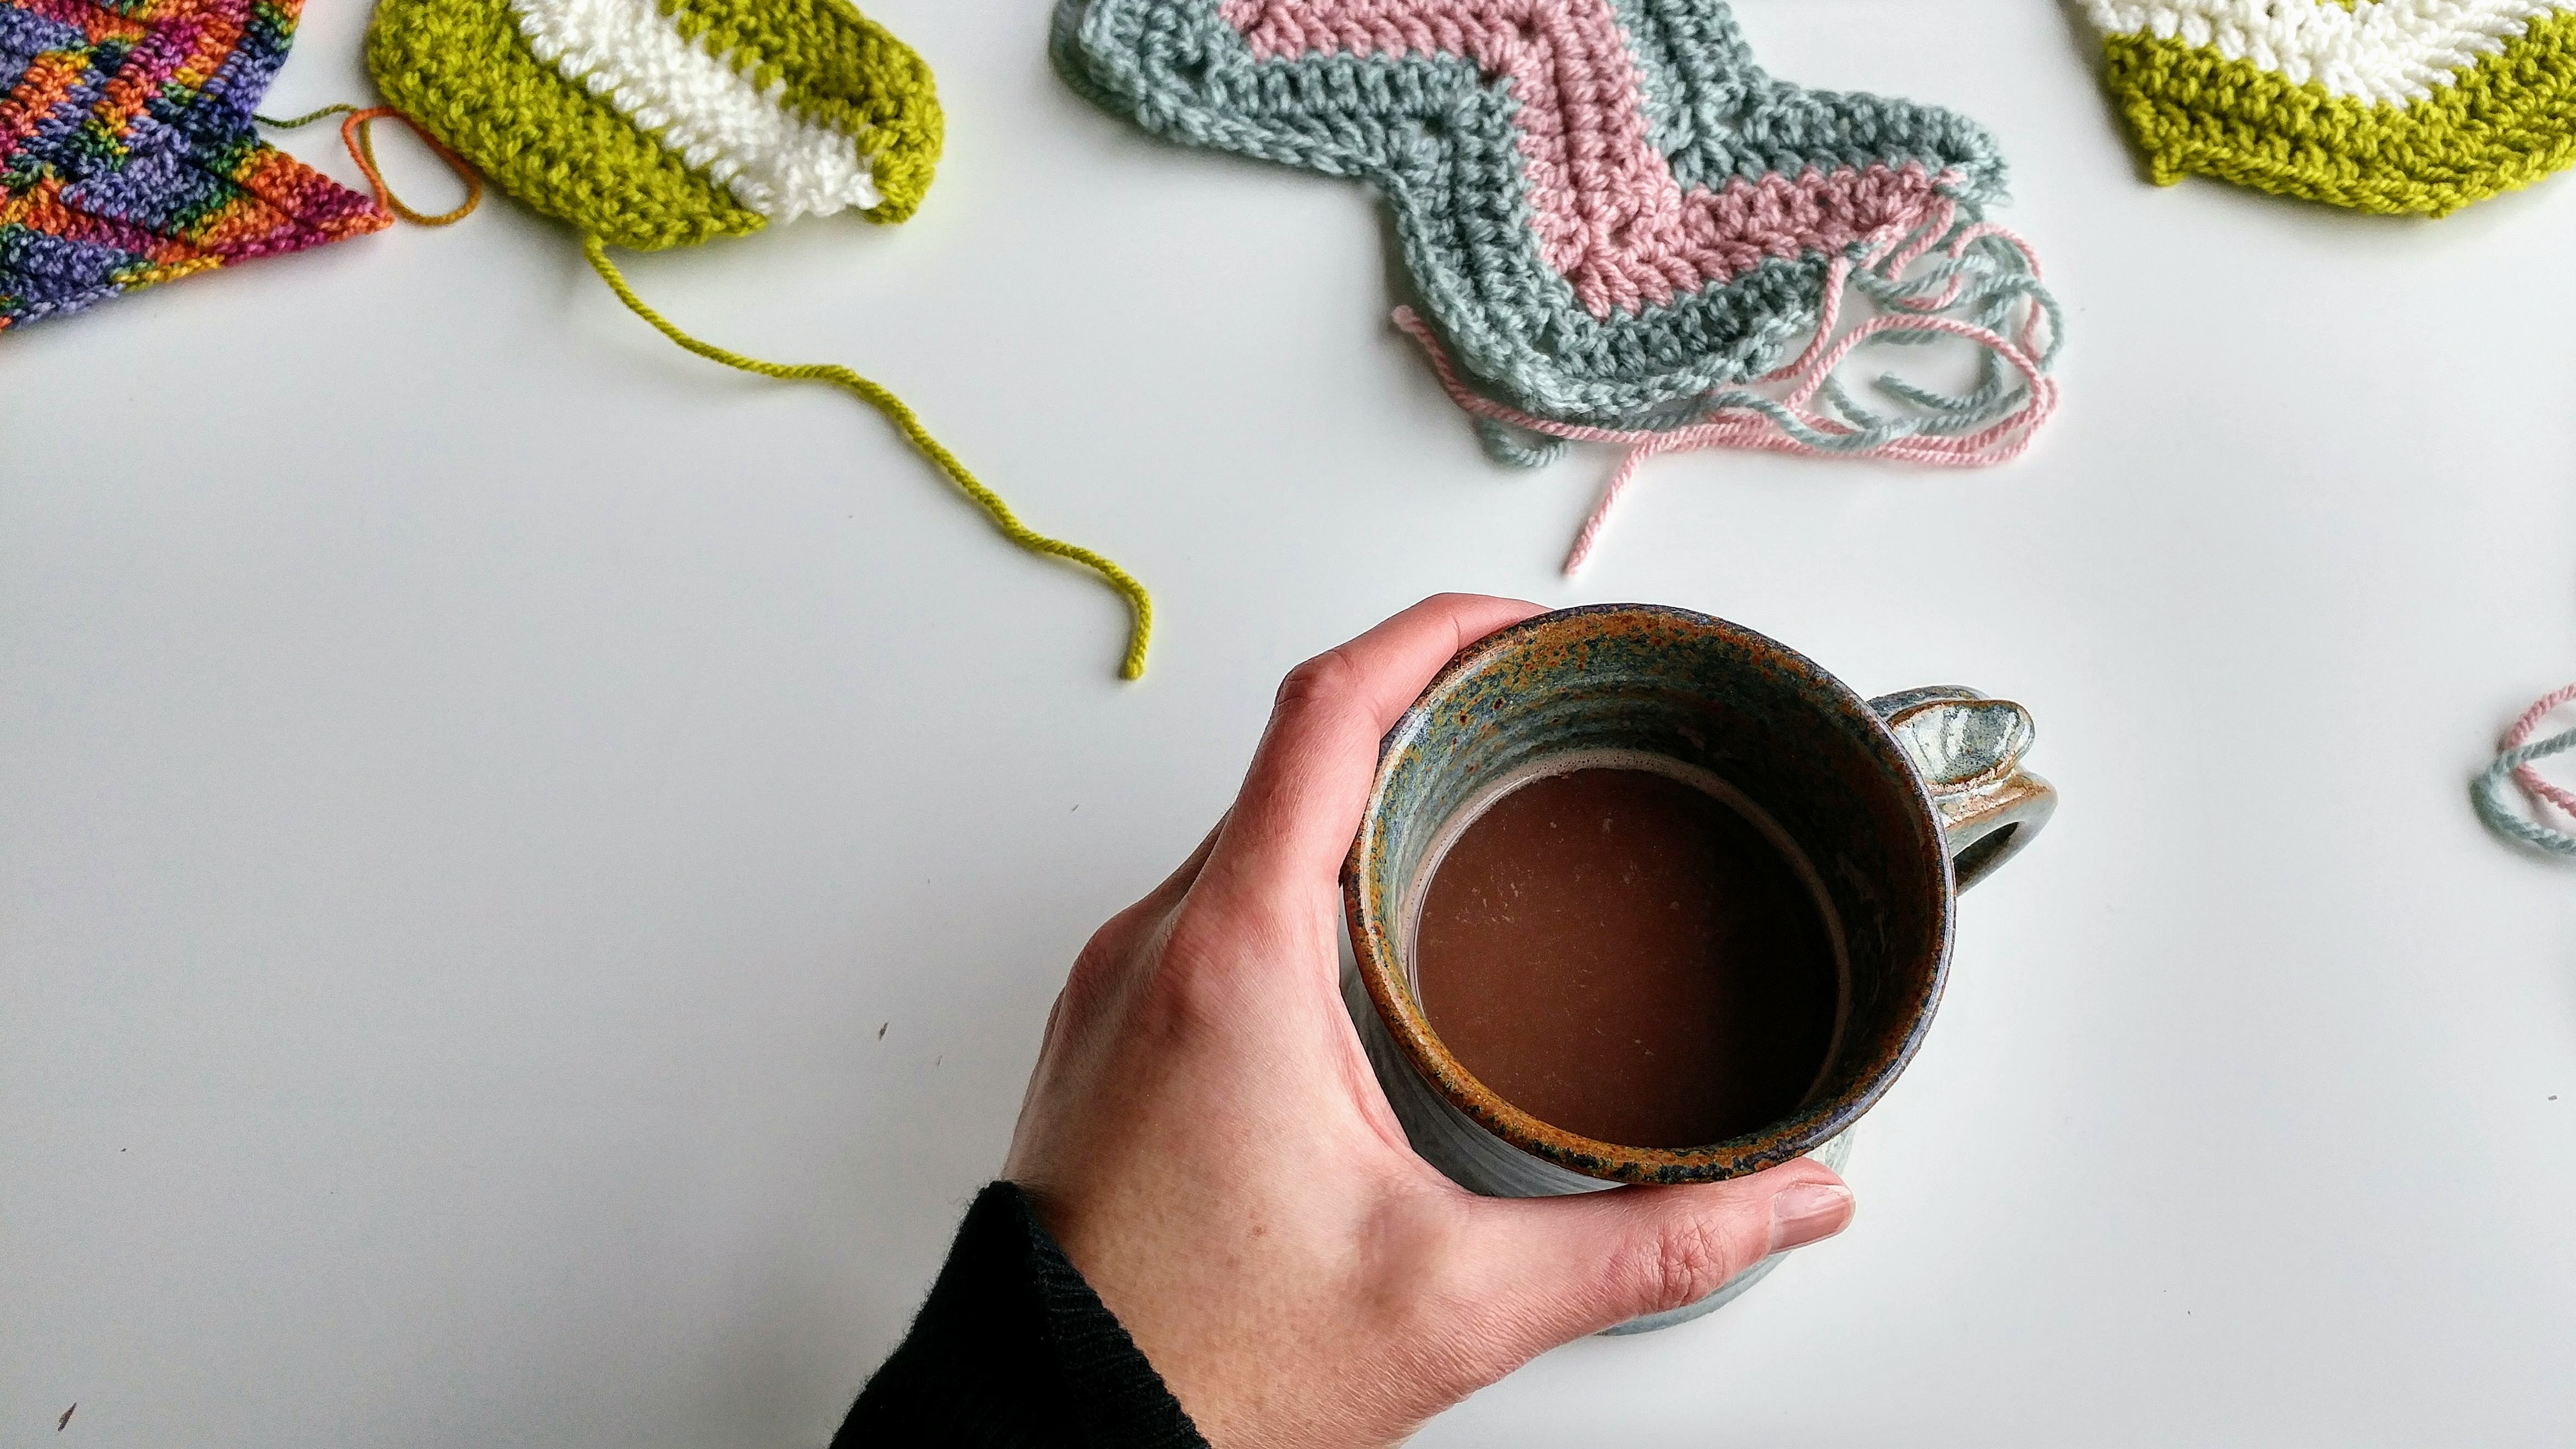 Coffee and crochet. More on my new class at https://www.kimwerker.com/blog